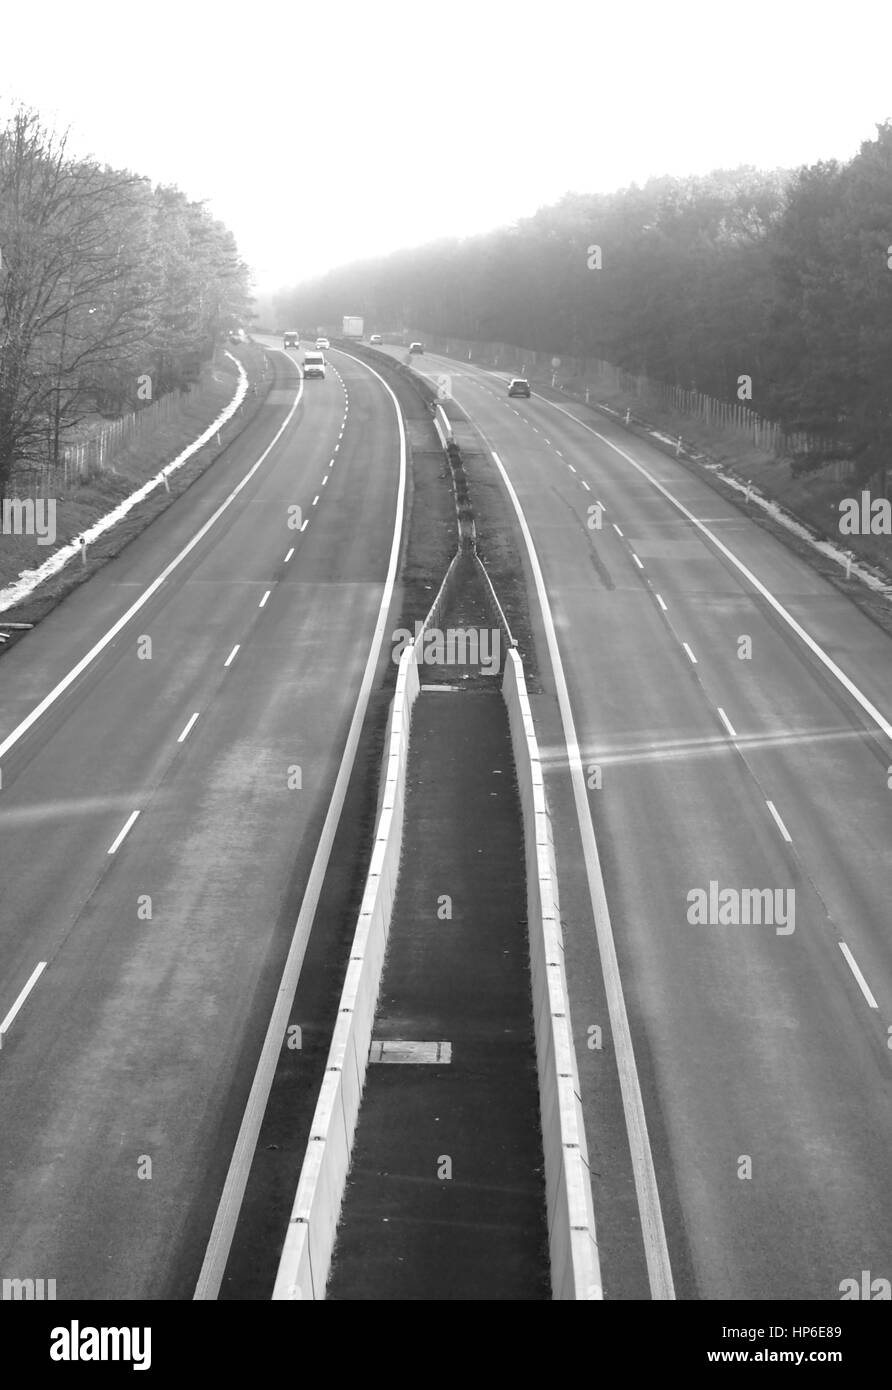 High angle view of motorway in monochrome Stock Photo